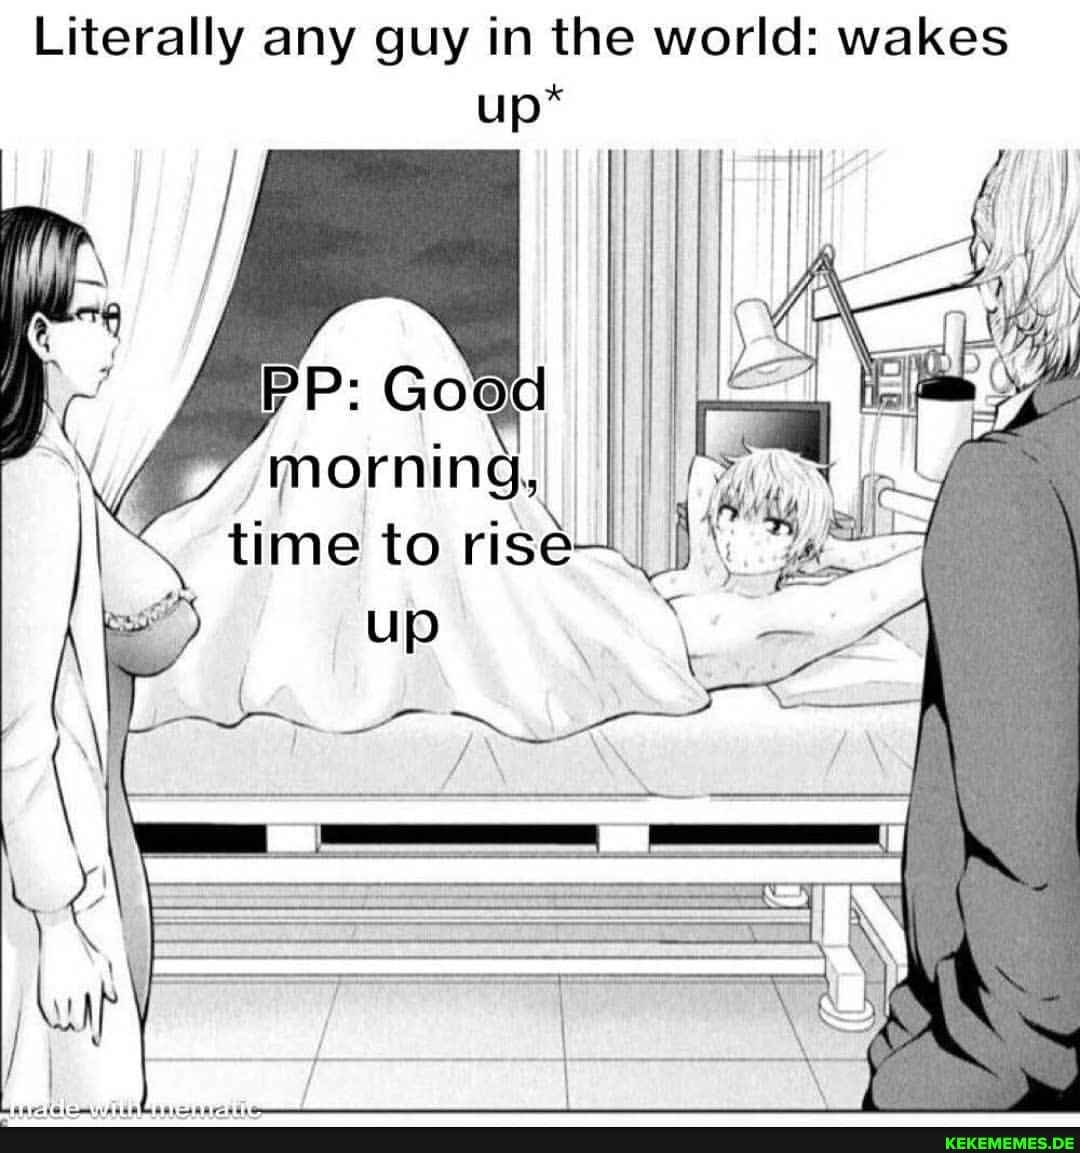 Literally any guy in the world: wakes morning, time to rise